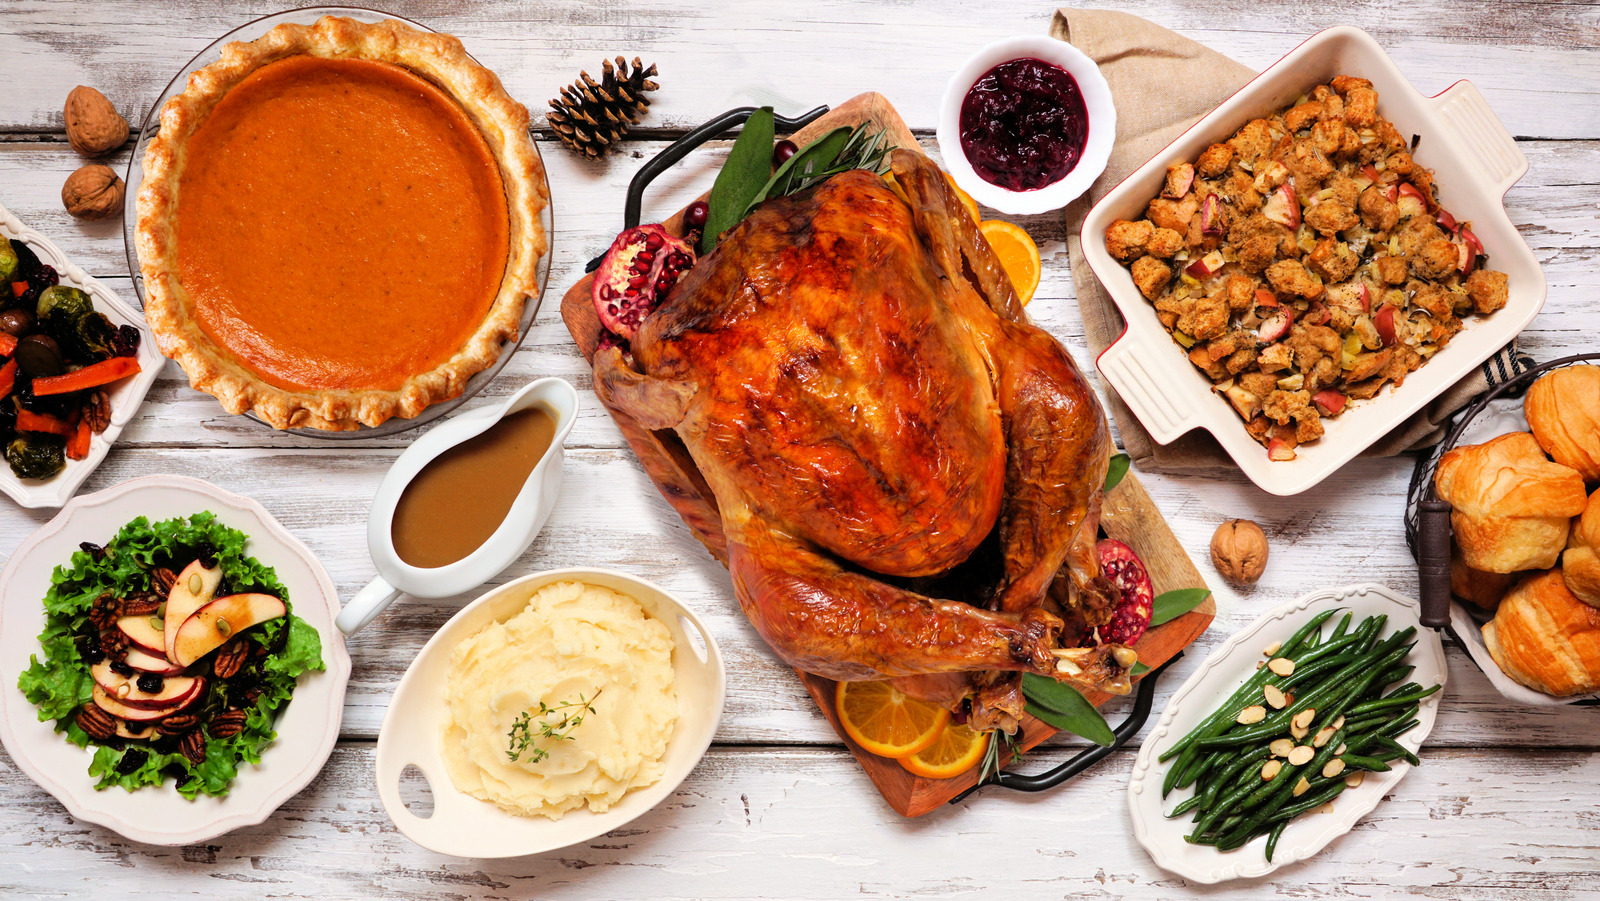 25-best-places-to-buy-your-pre-cooked-thanksgiving-dinner